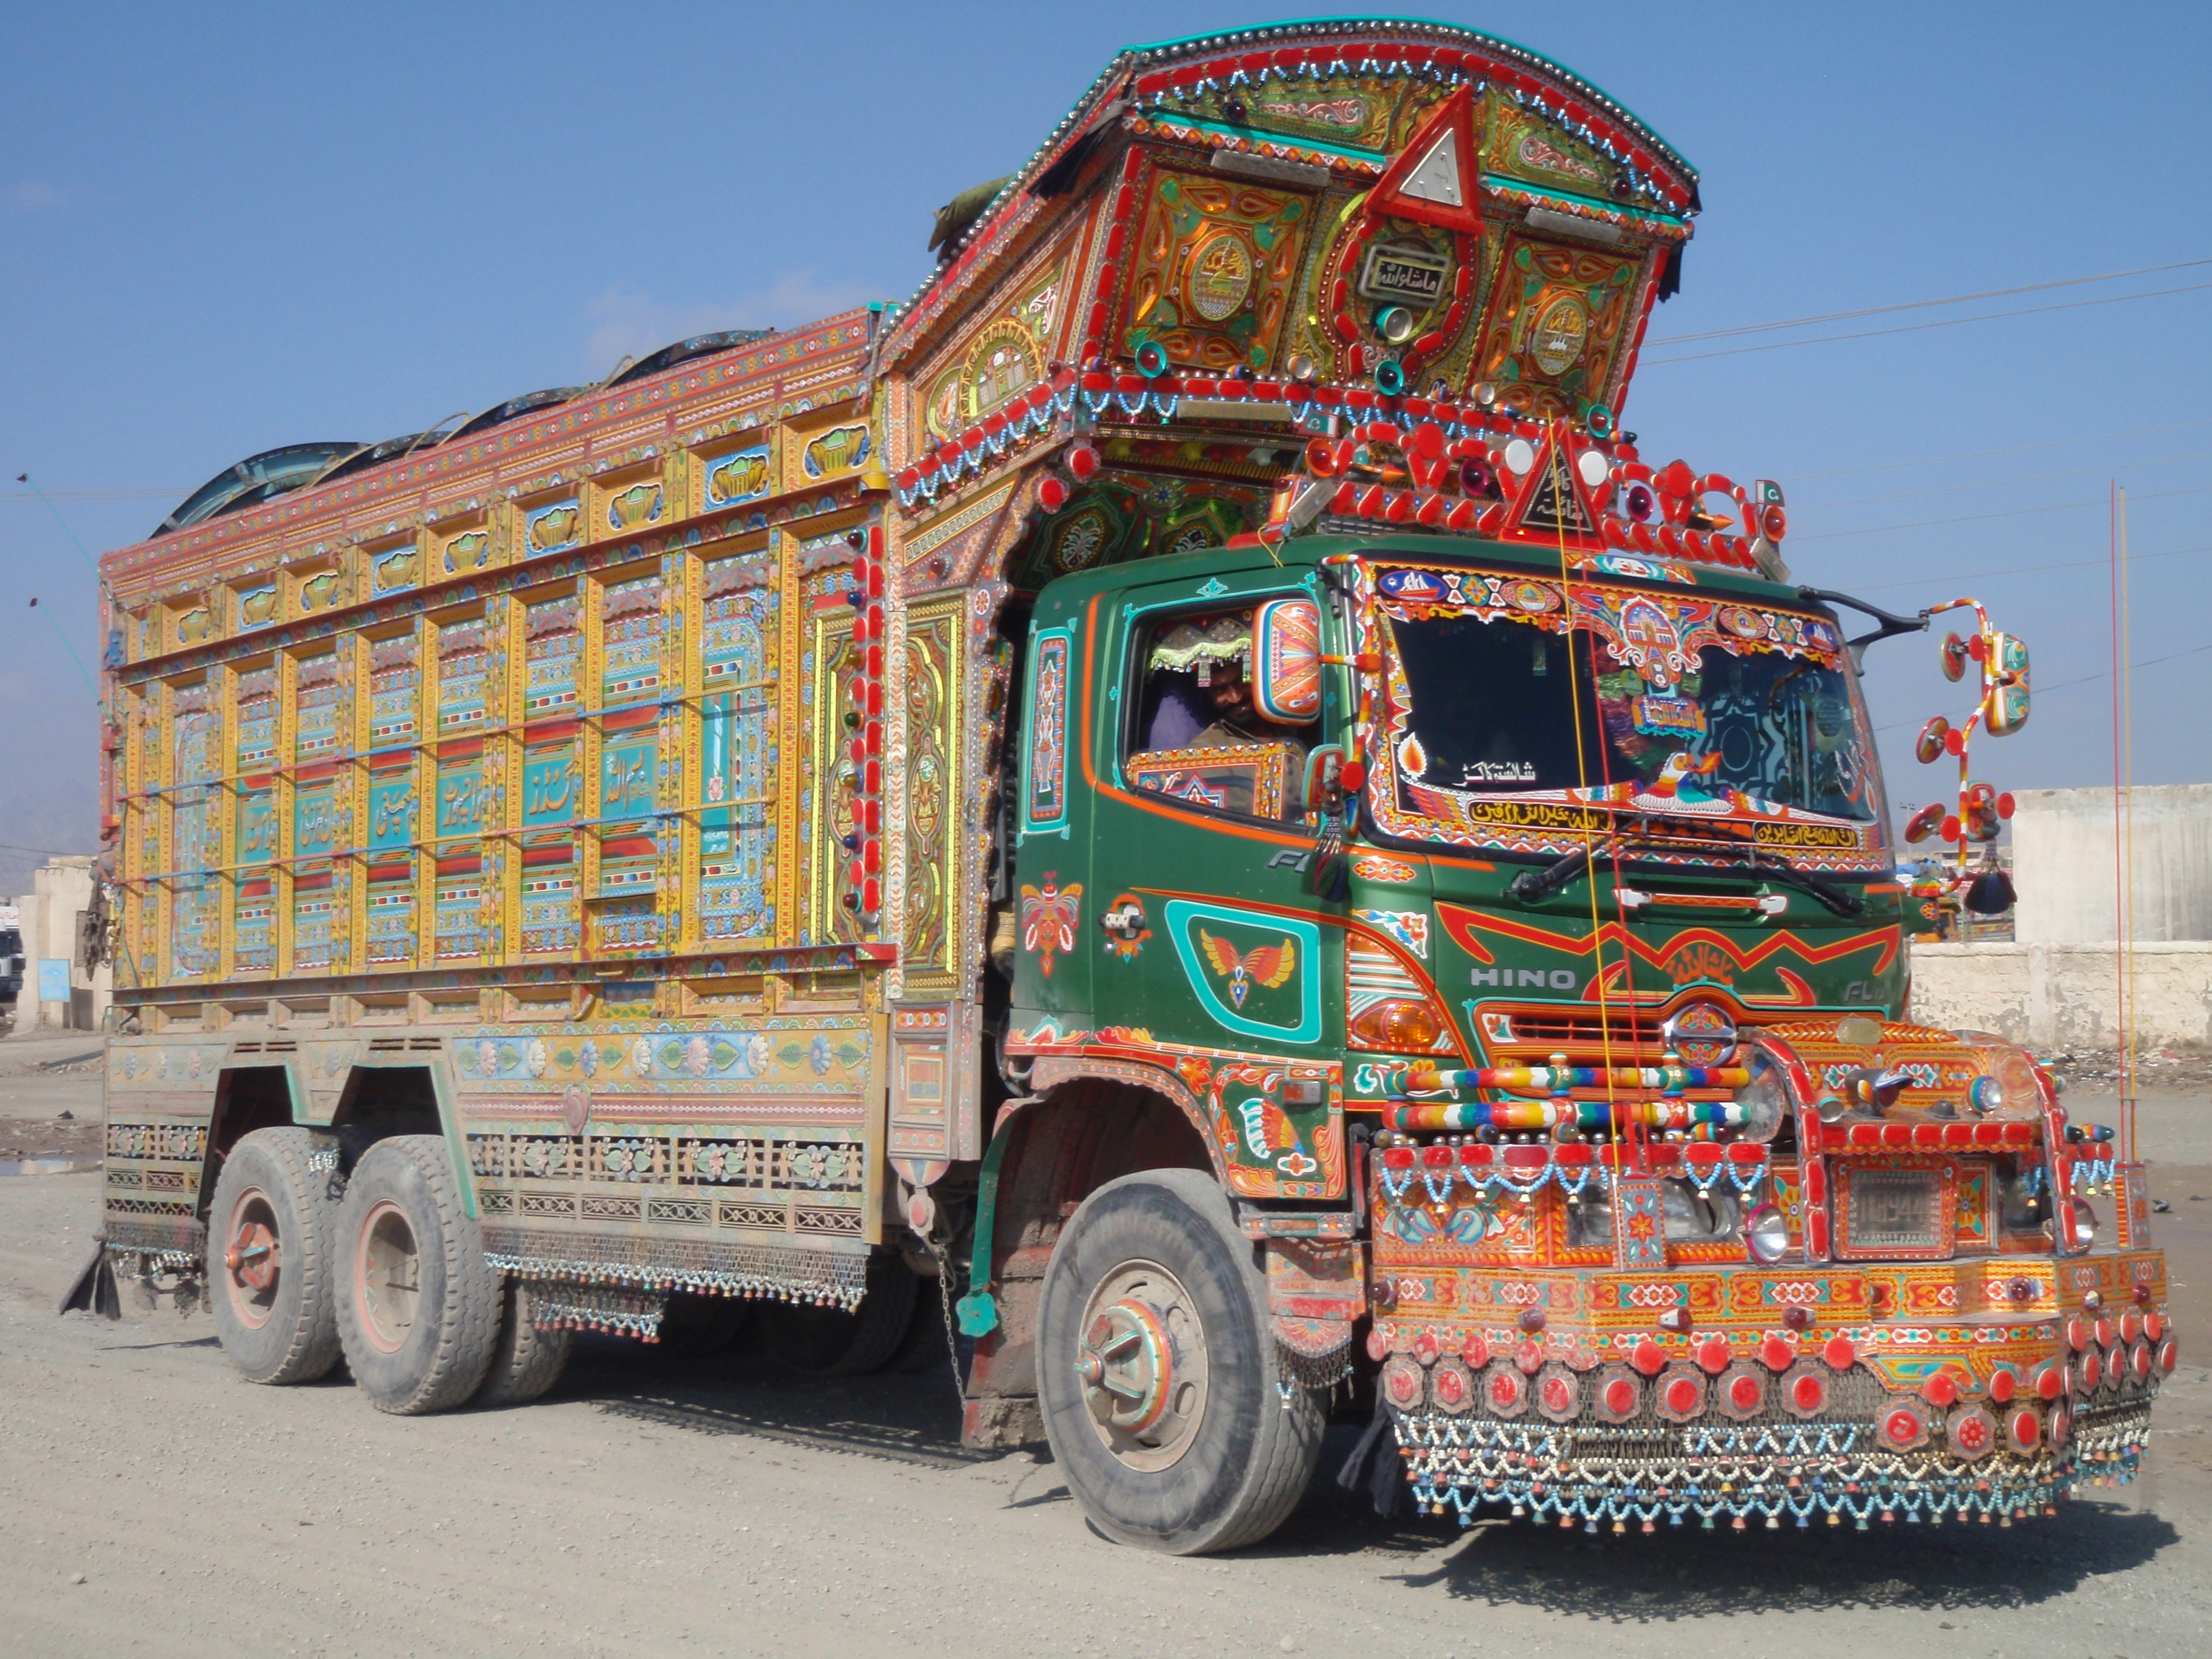 Photo of painted Pakistani Truck, Creative Commons license by https://www.flickr.com/photos/39967291@N04/